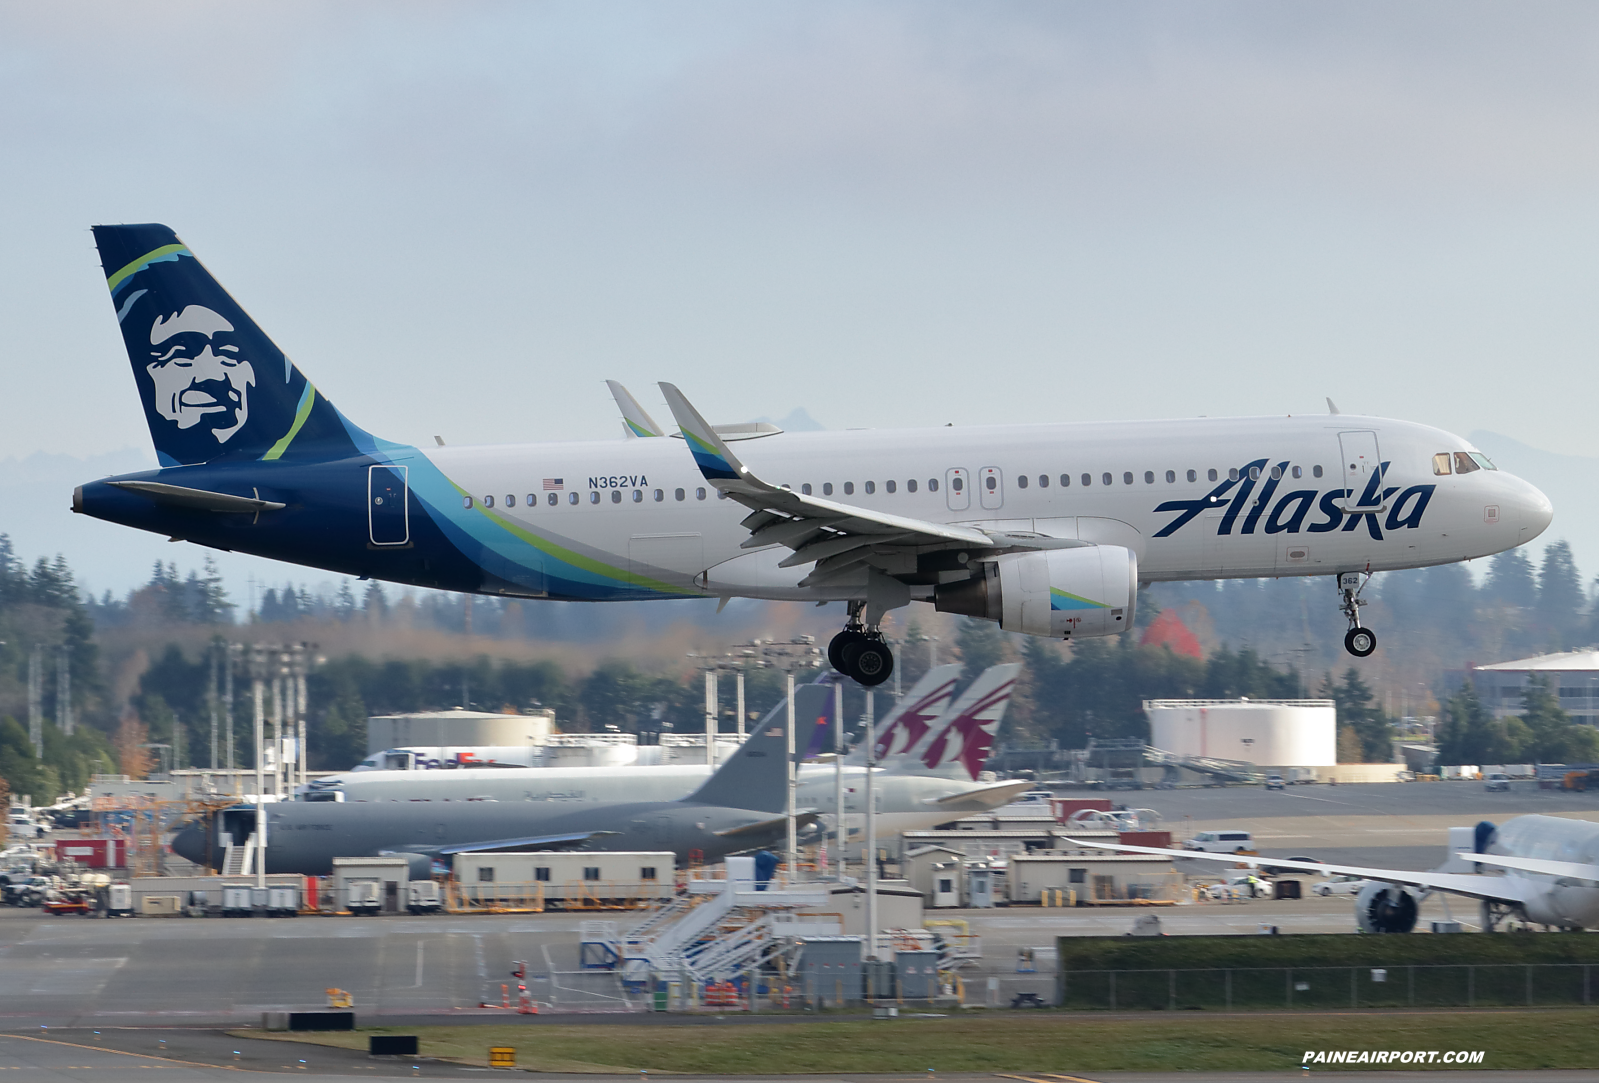 Alaska Airlines A320 N362VA at Paine Field